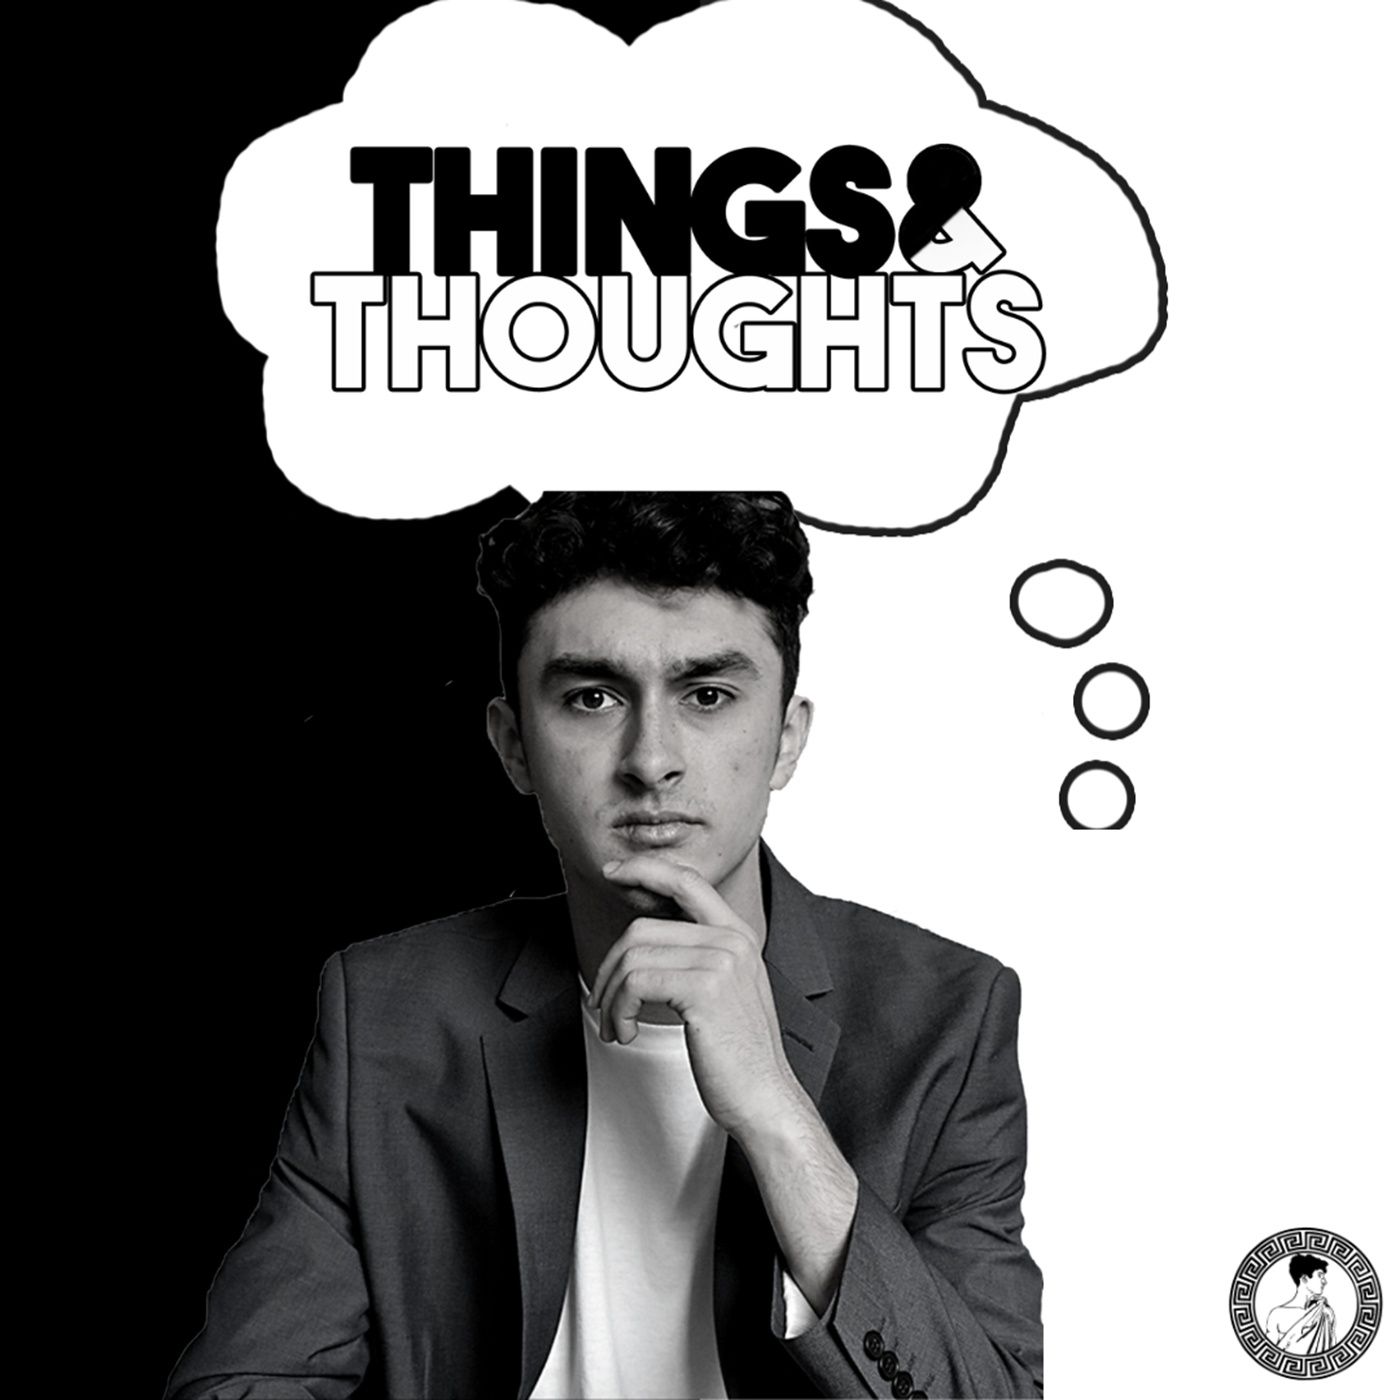 Things & Thoughts